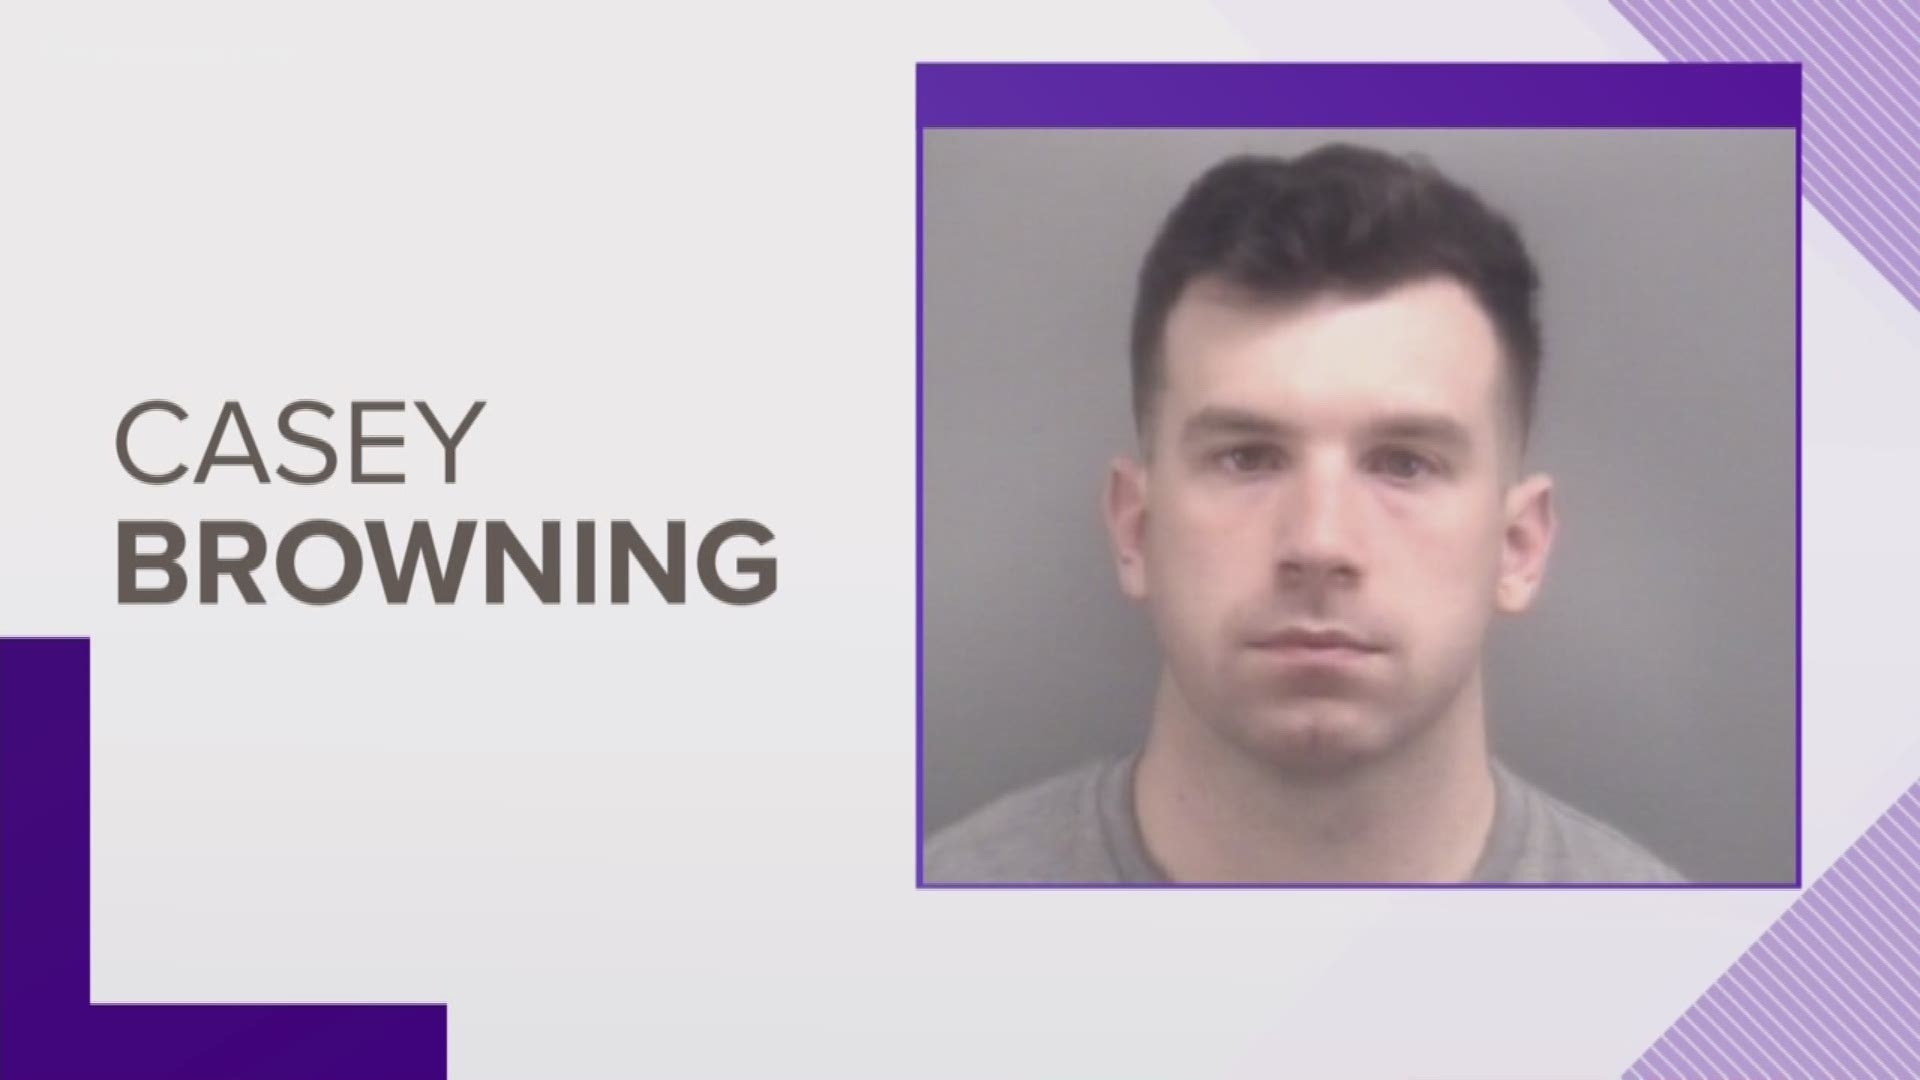 A man was arrested and charged with DUI after the 23-year-old drove on Top Golf's driving range.